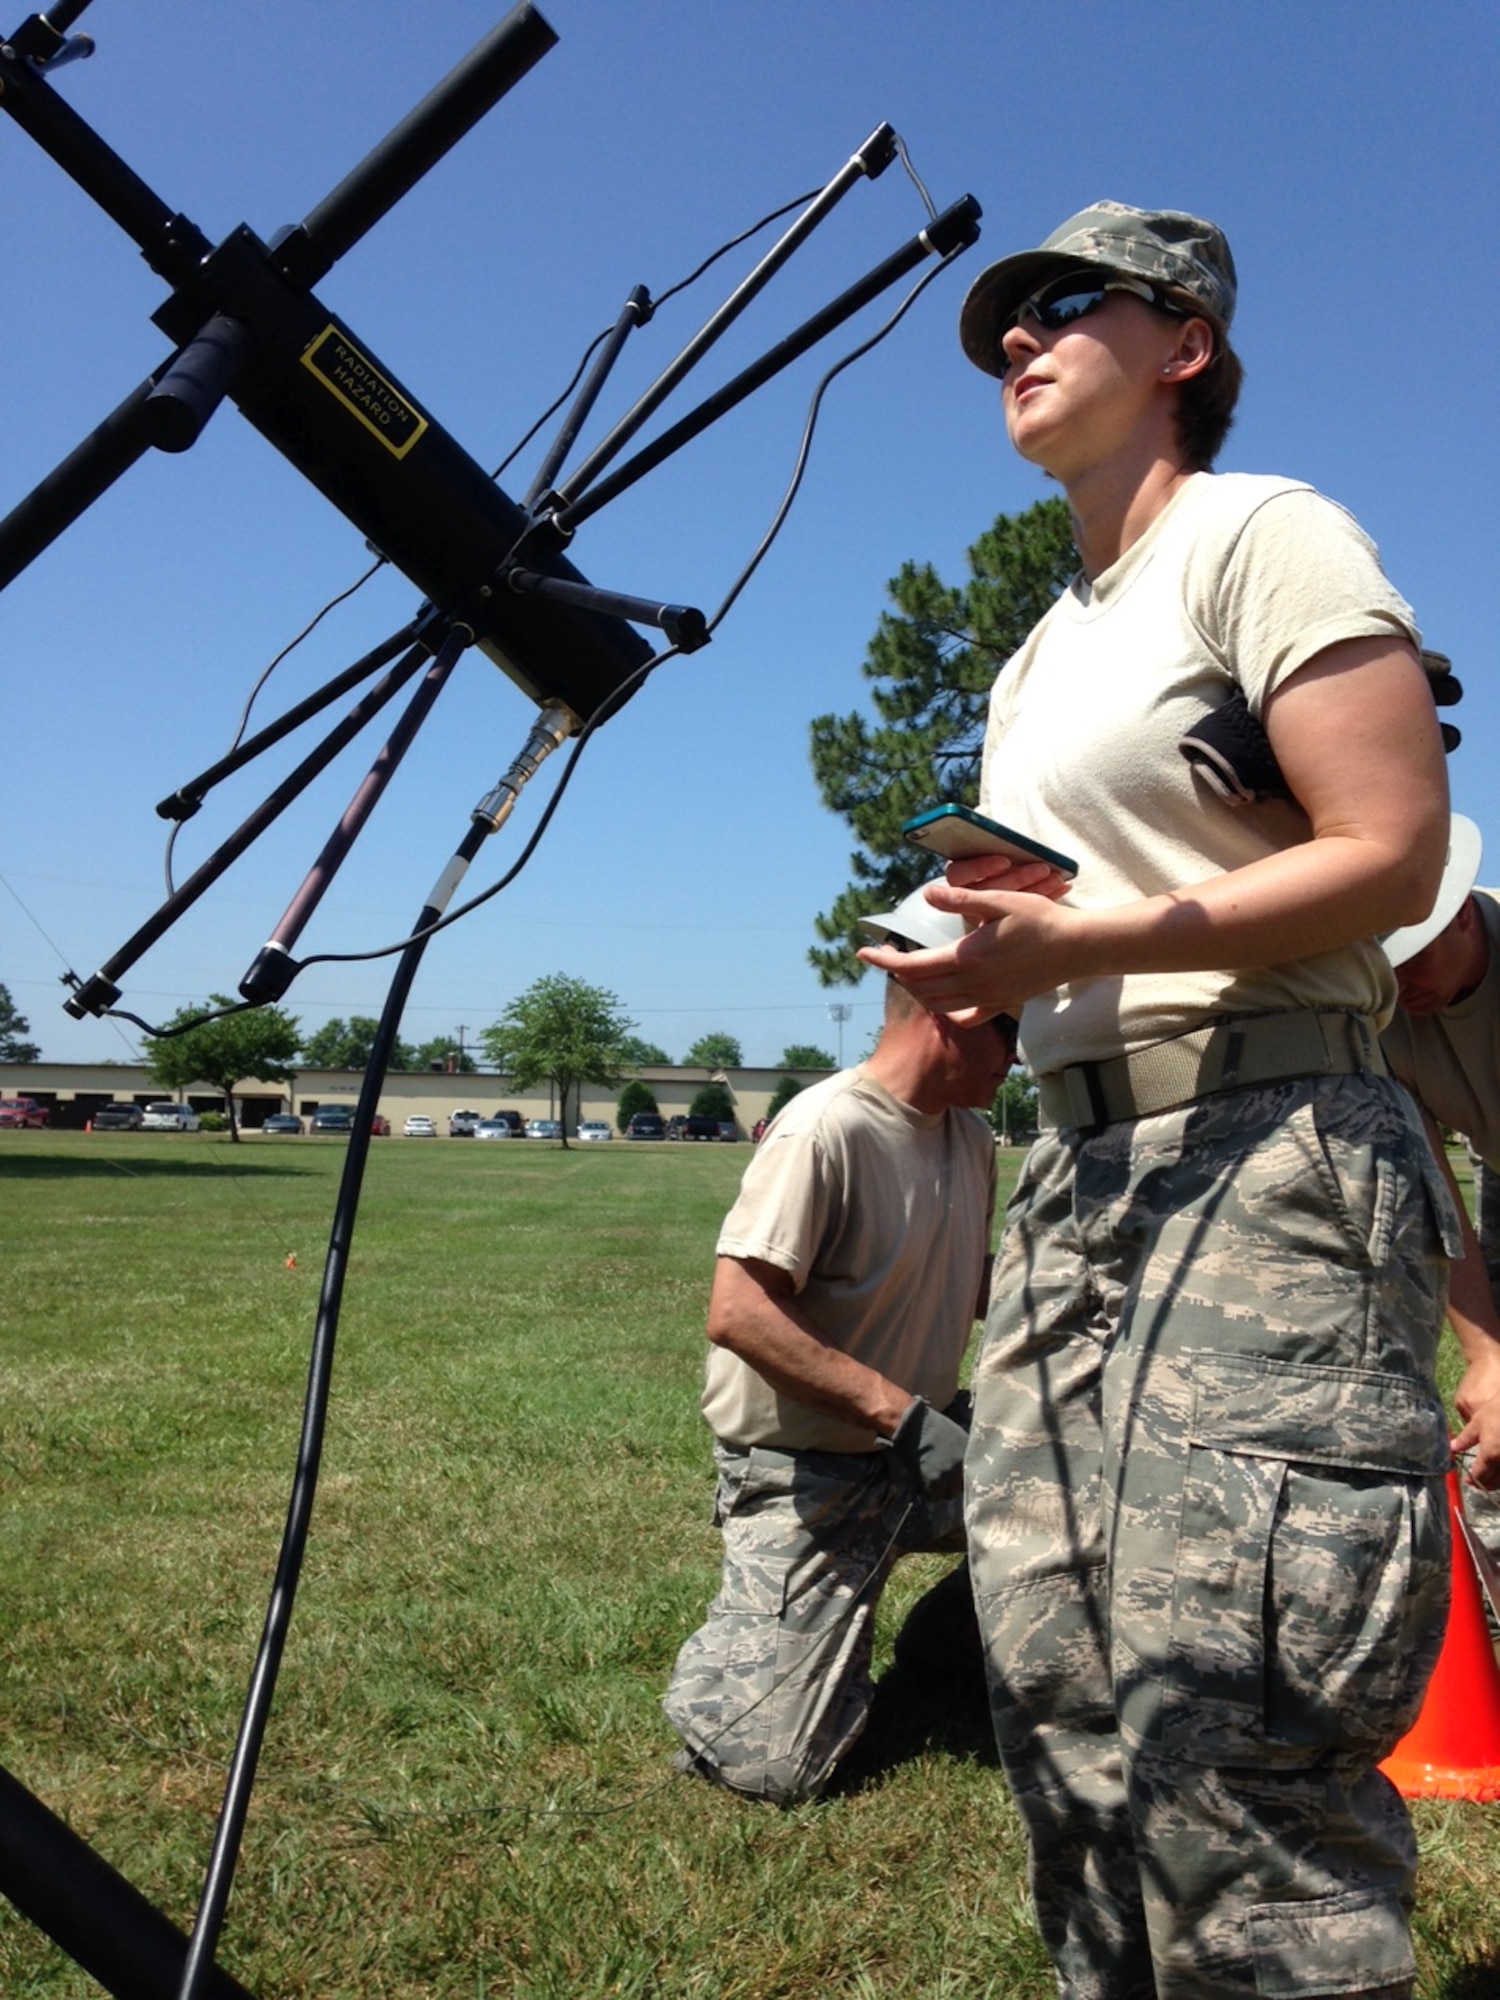 U.S. Air Force Technical Sgt. Sherry Williams, of  Fayetteville, N.C. a member of the 263rd Combat Communications Squadron, North Carolina Air National Guard, helps set up an antenna for satellite communications at Seymour Johnson Air Force Base, Goldsboro, N.C. June 15, 2015. Williams and her unit supported active duty units during exercise "Medusa Rising" as part of their 2015 annual training. (U.S. Air Force photo by Lt. Col. Robert Carver, North Carolina Air National Guard Public Affairs/Released)